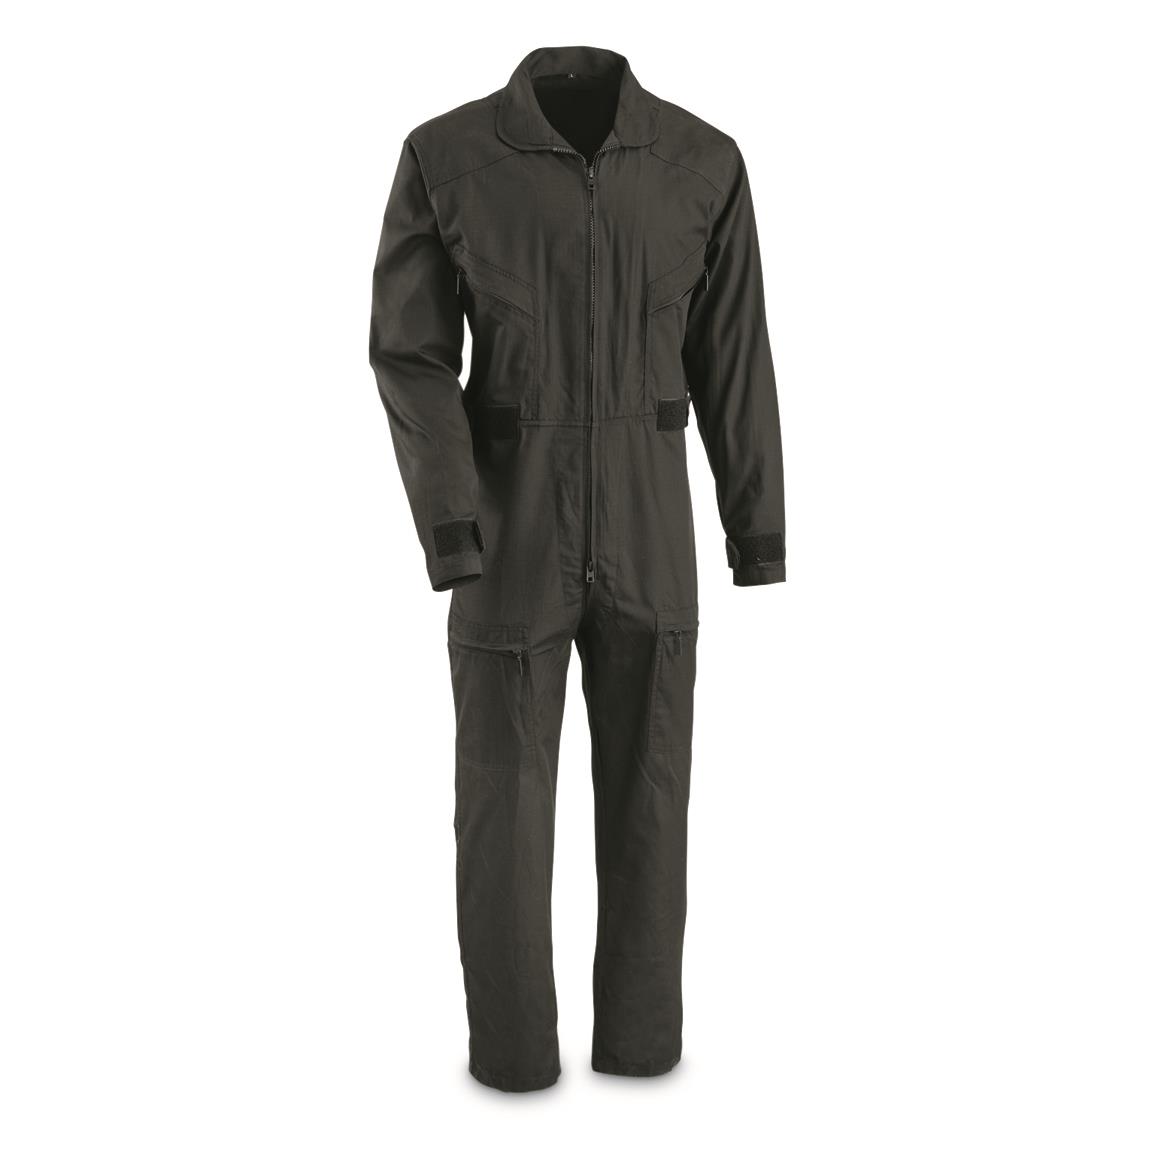 Chicago Police Department Surplus Duty Coveralls, New, Black